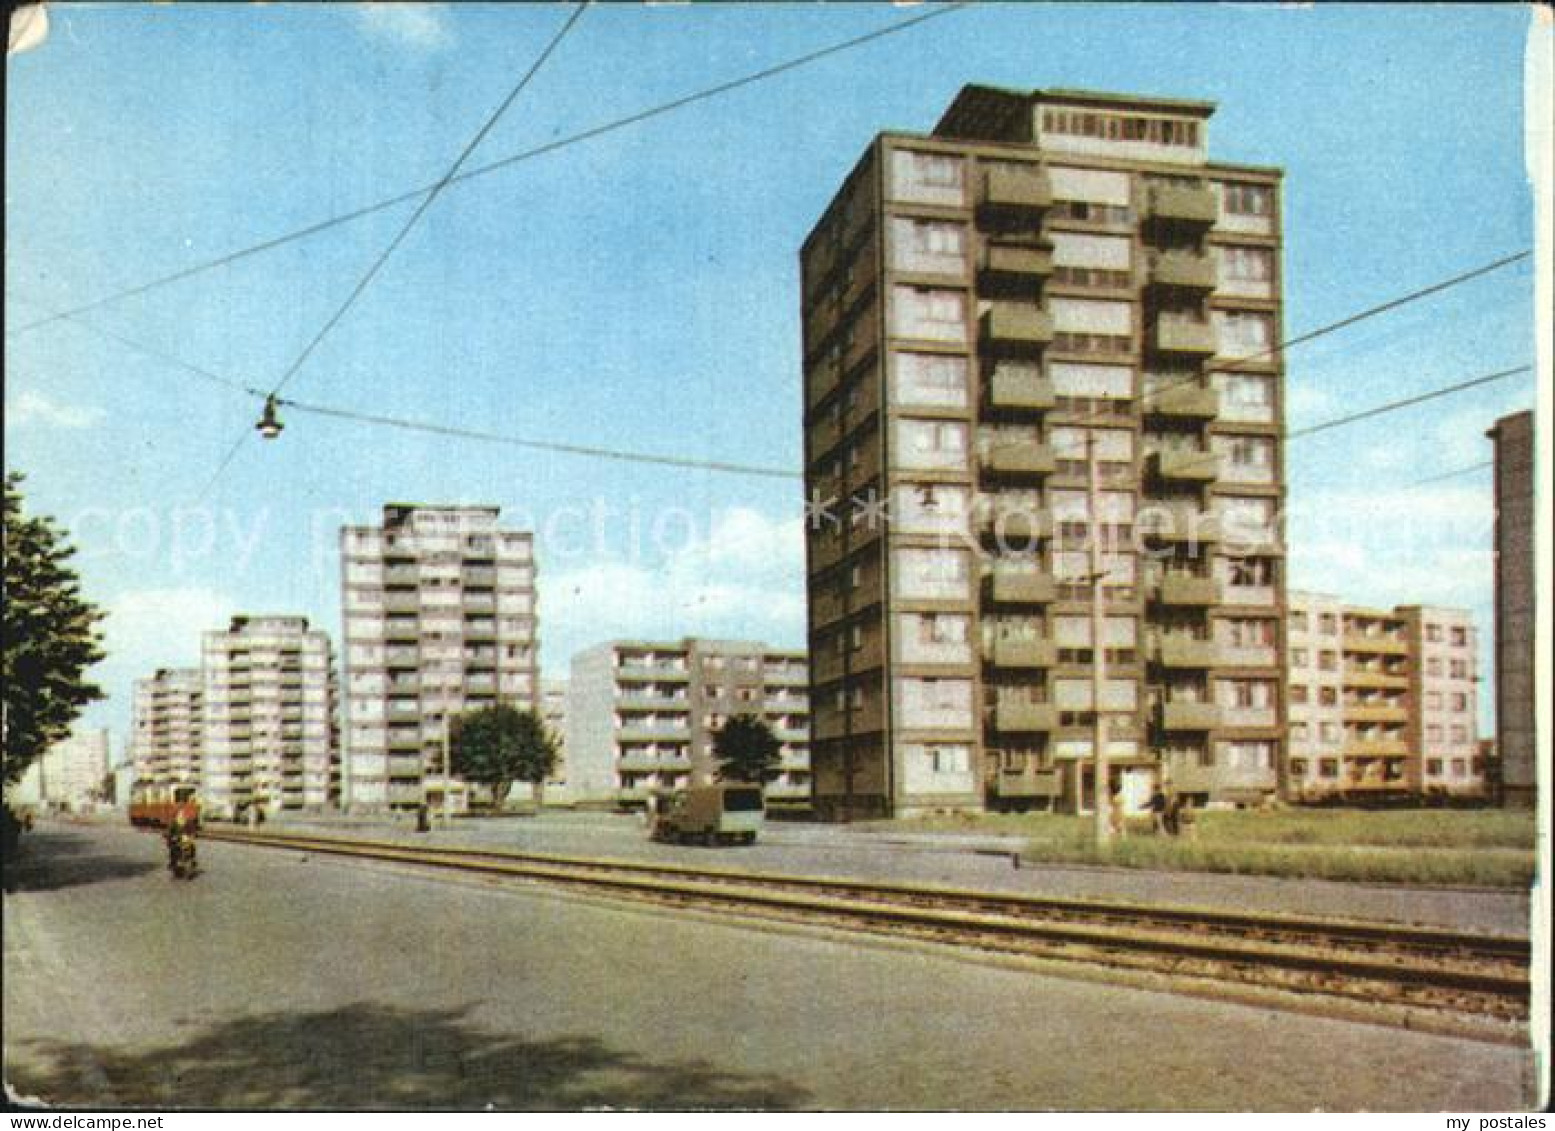 72610612 Wroclaw Hochhaus Siedlung  - Pologne